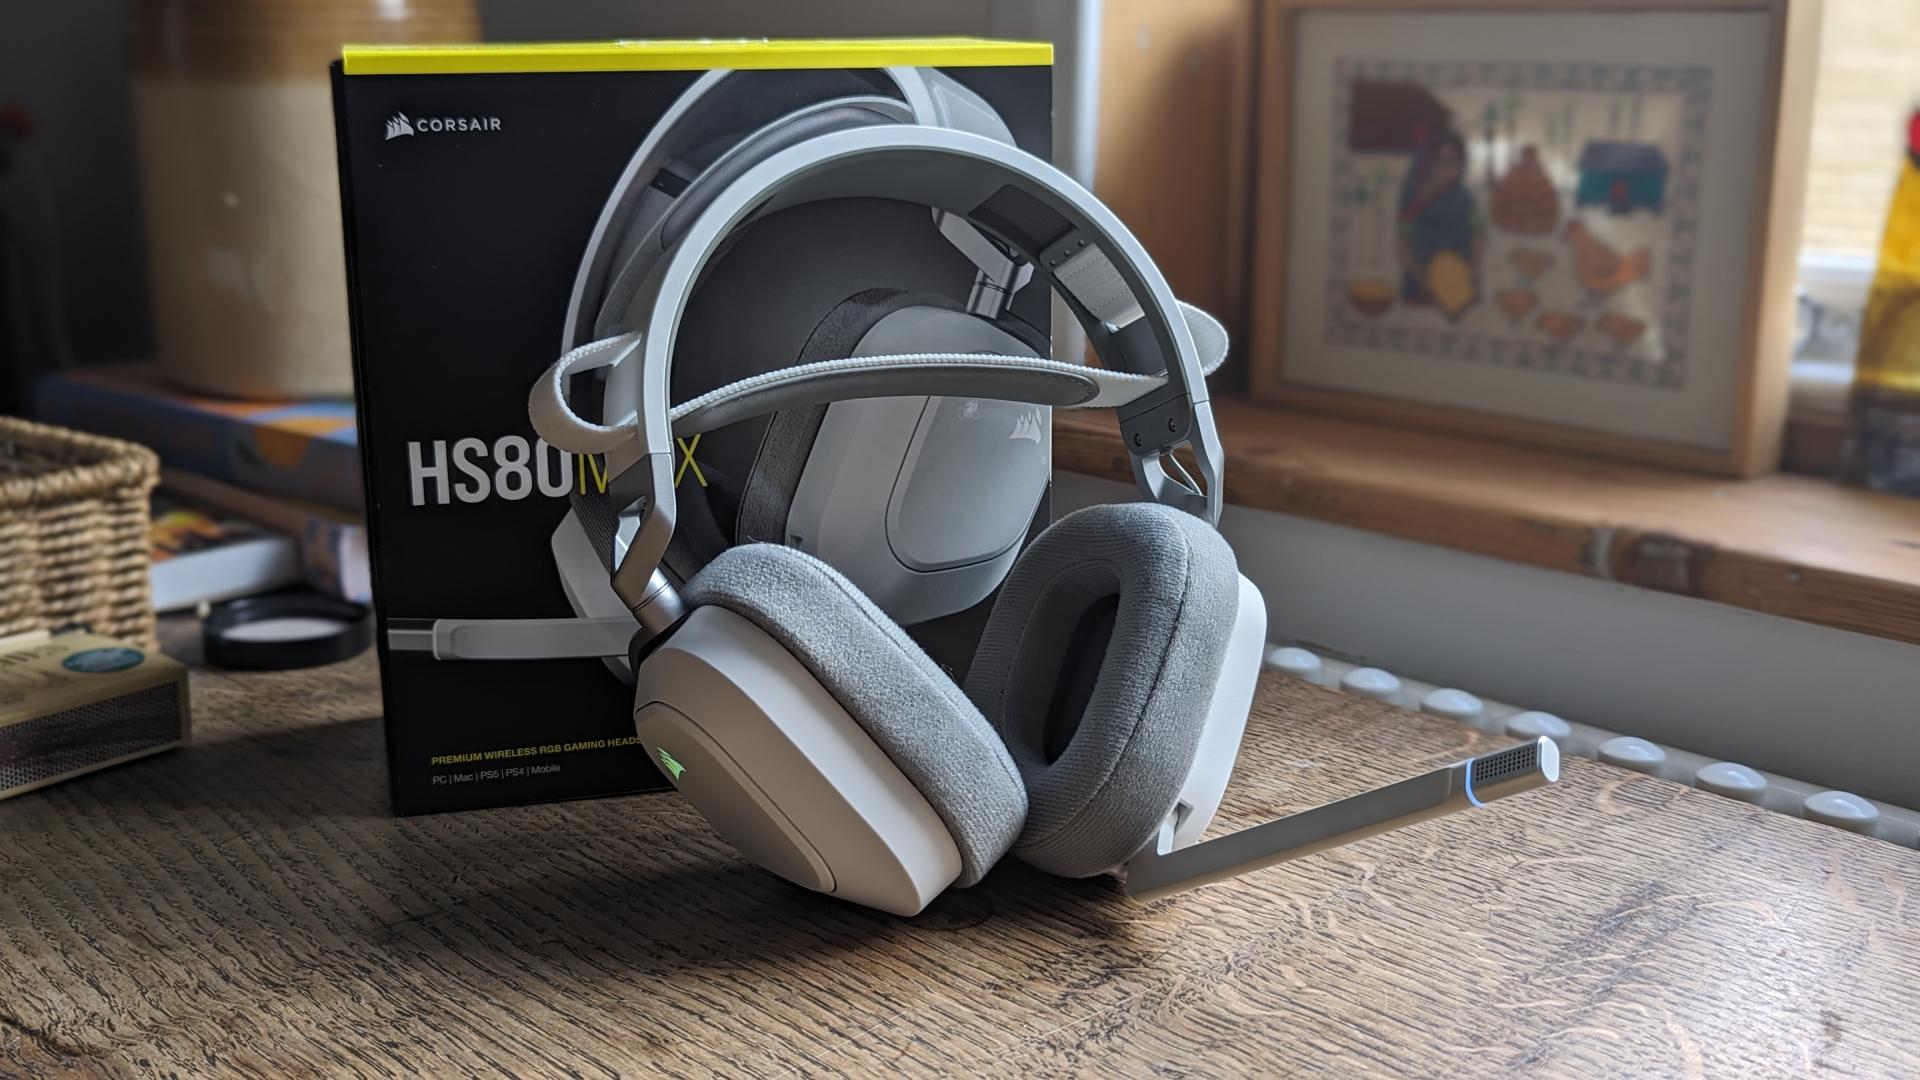 Corsair HS80 Max review: A terrific gaming headset with amazing battery life